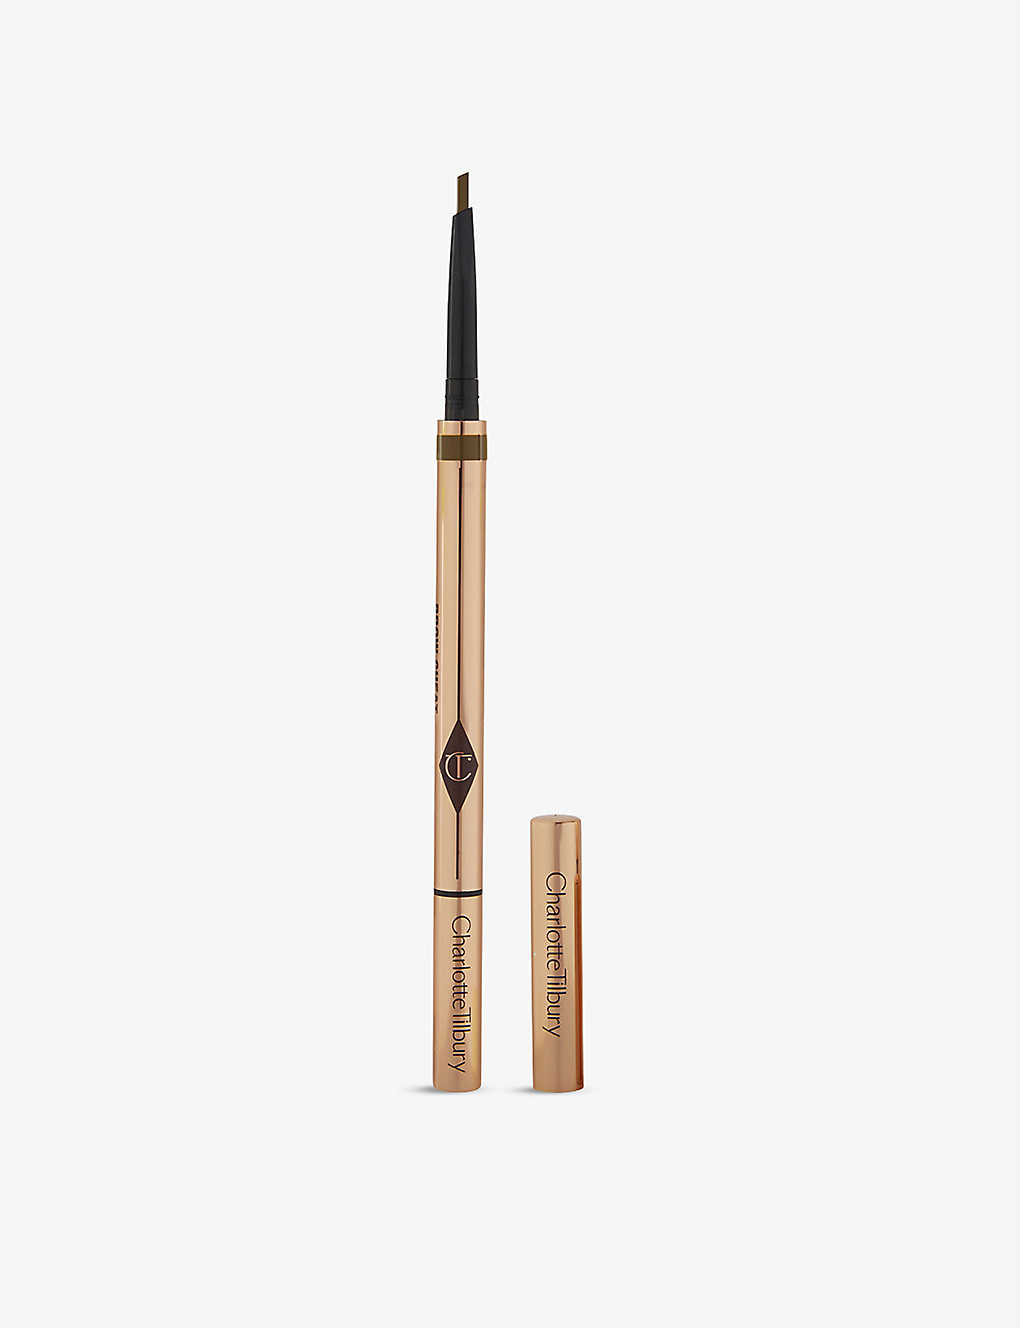 Charlotte Tilbury Brow Cheat Refillable Eyebrow Pencil 0.1g In Soft Brown